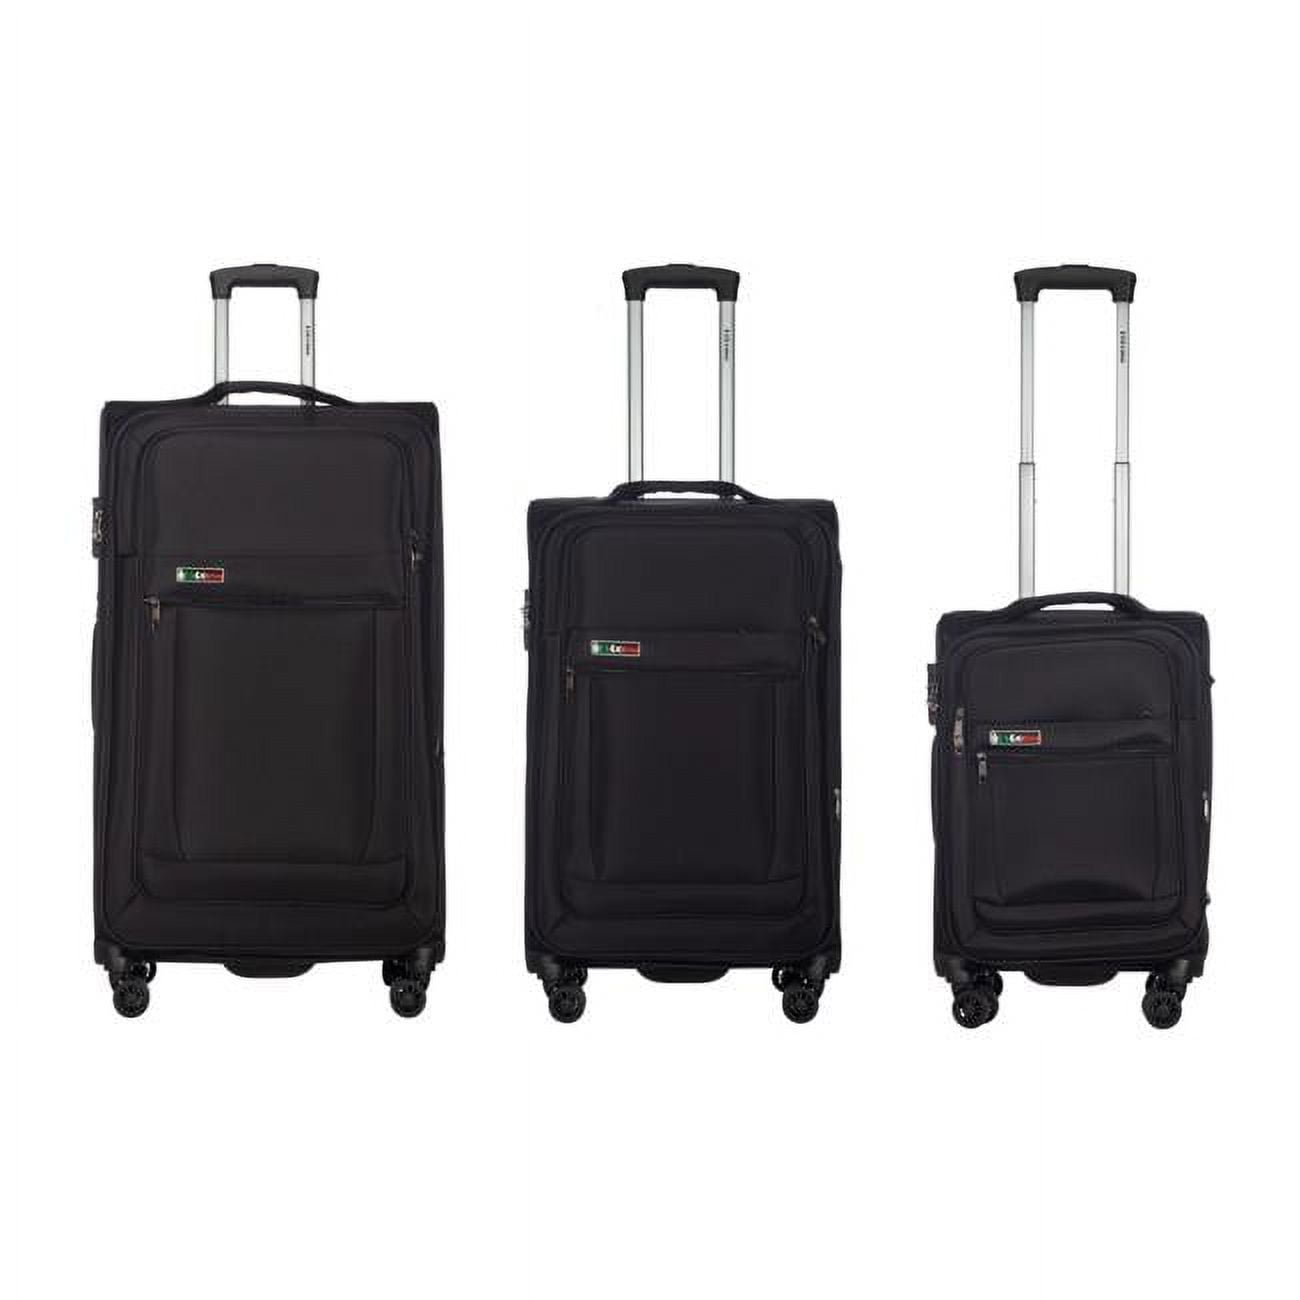 Picture of America&apos;s Travel Merchandise LUCA-BLK-0578 Luca Collection Black luggage Set 3pc(20/26/30&apos;) Suitcase